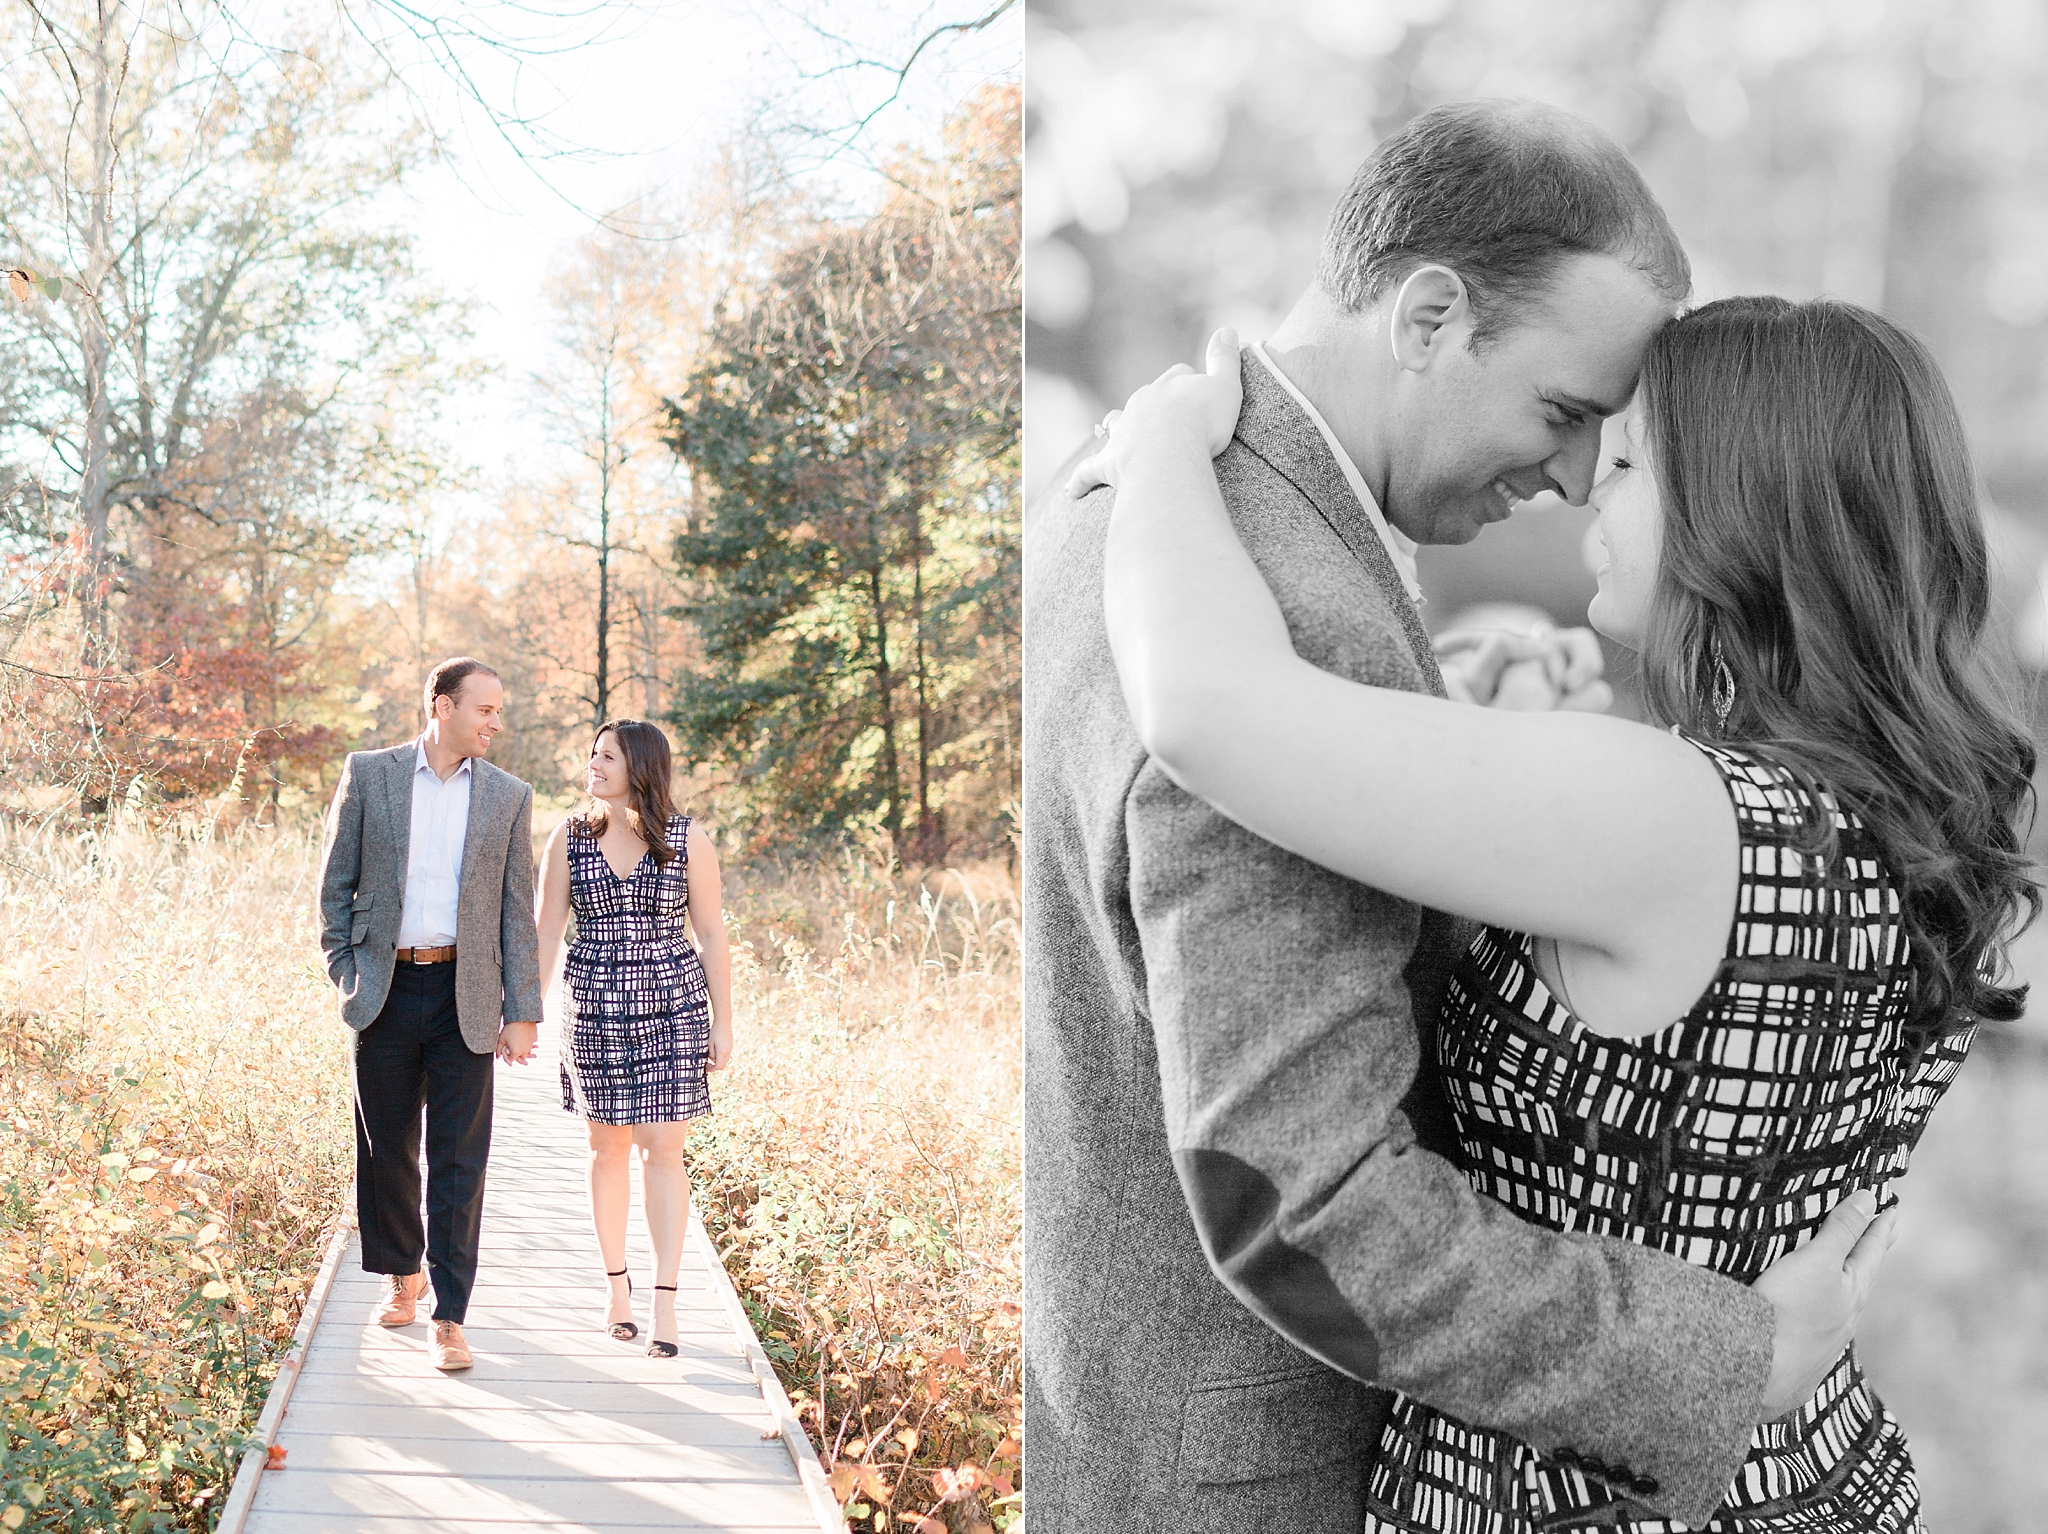 Fall engagement photos never looked more beautiful than at Manassas Battlefield Park! These images were captured by DC wedding photographer, Alicia Lacey. 